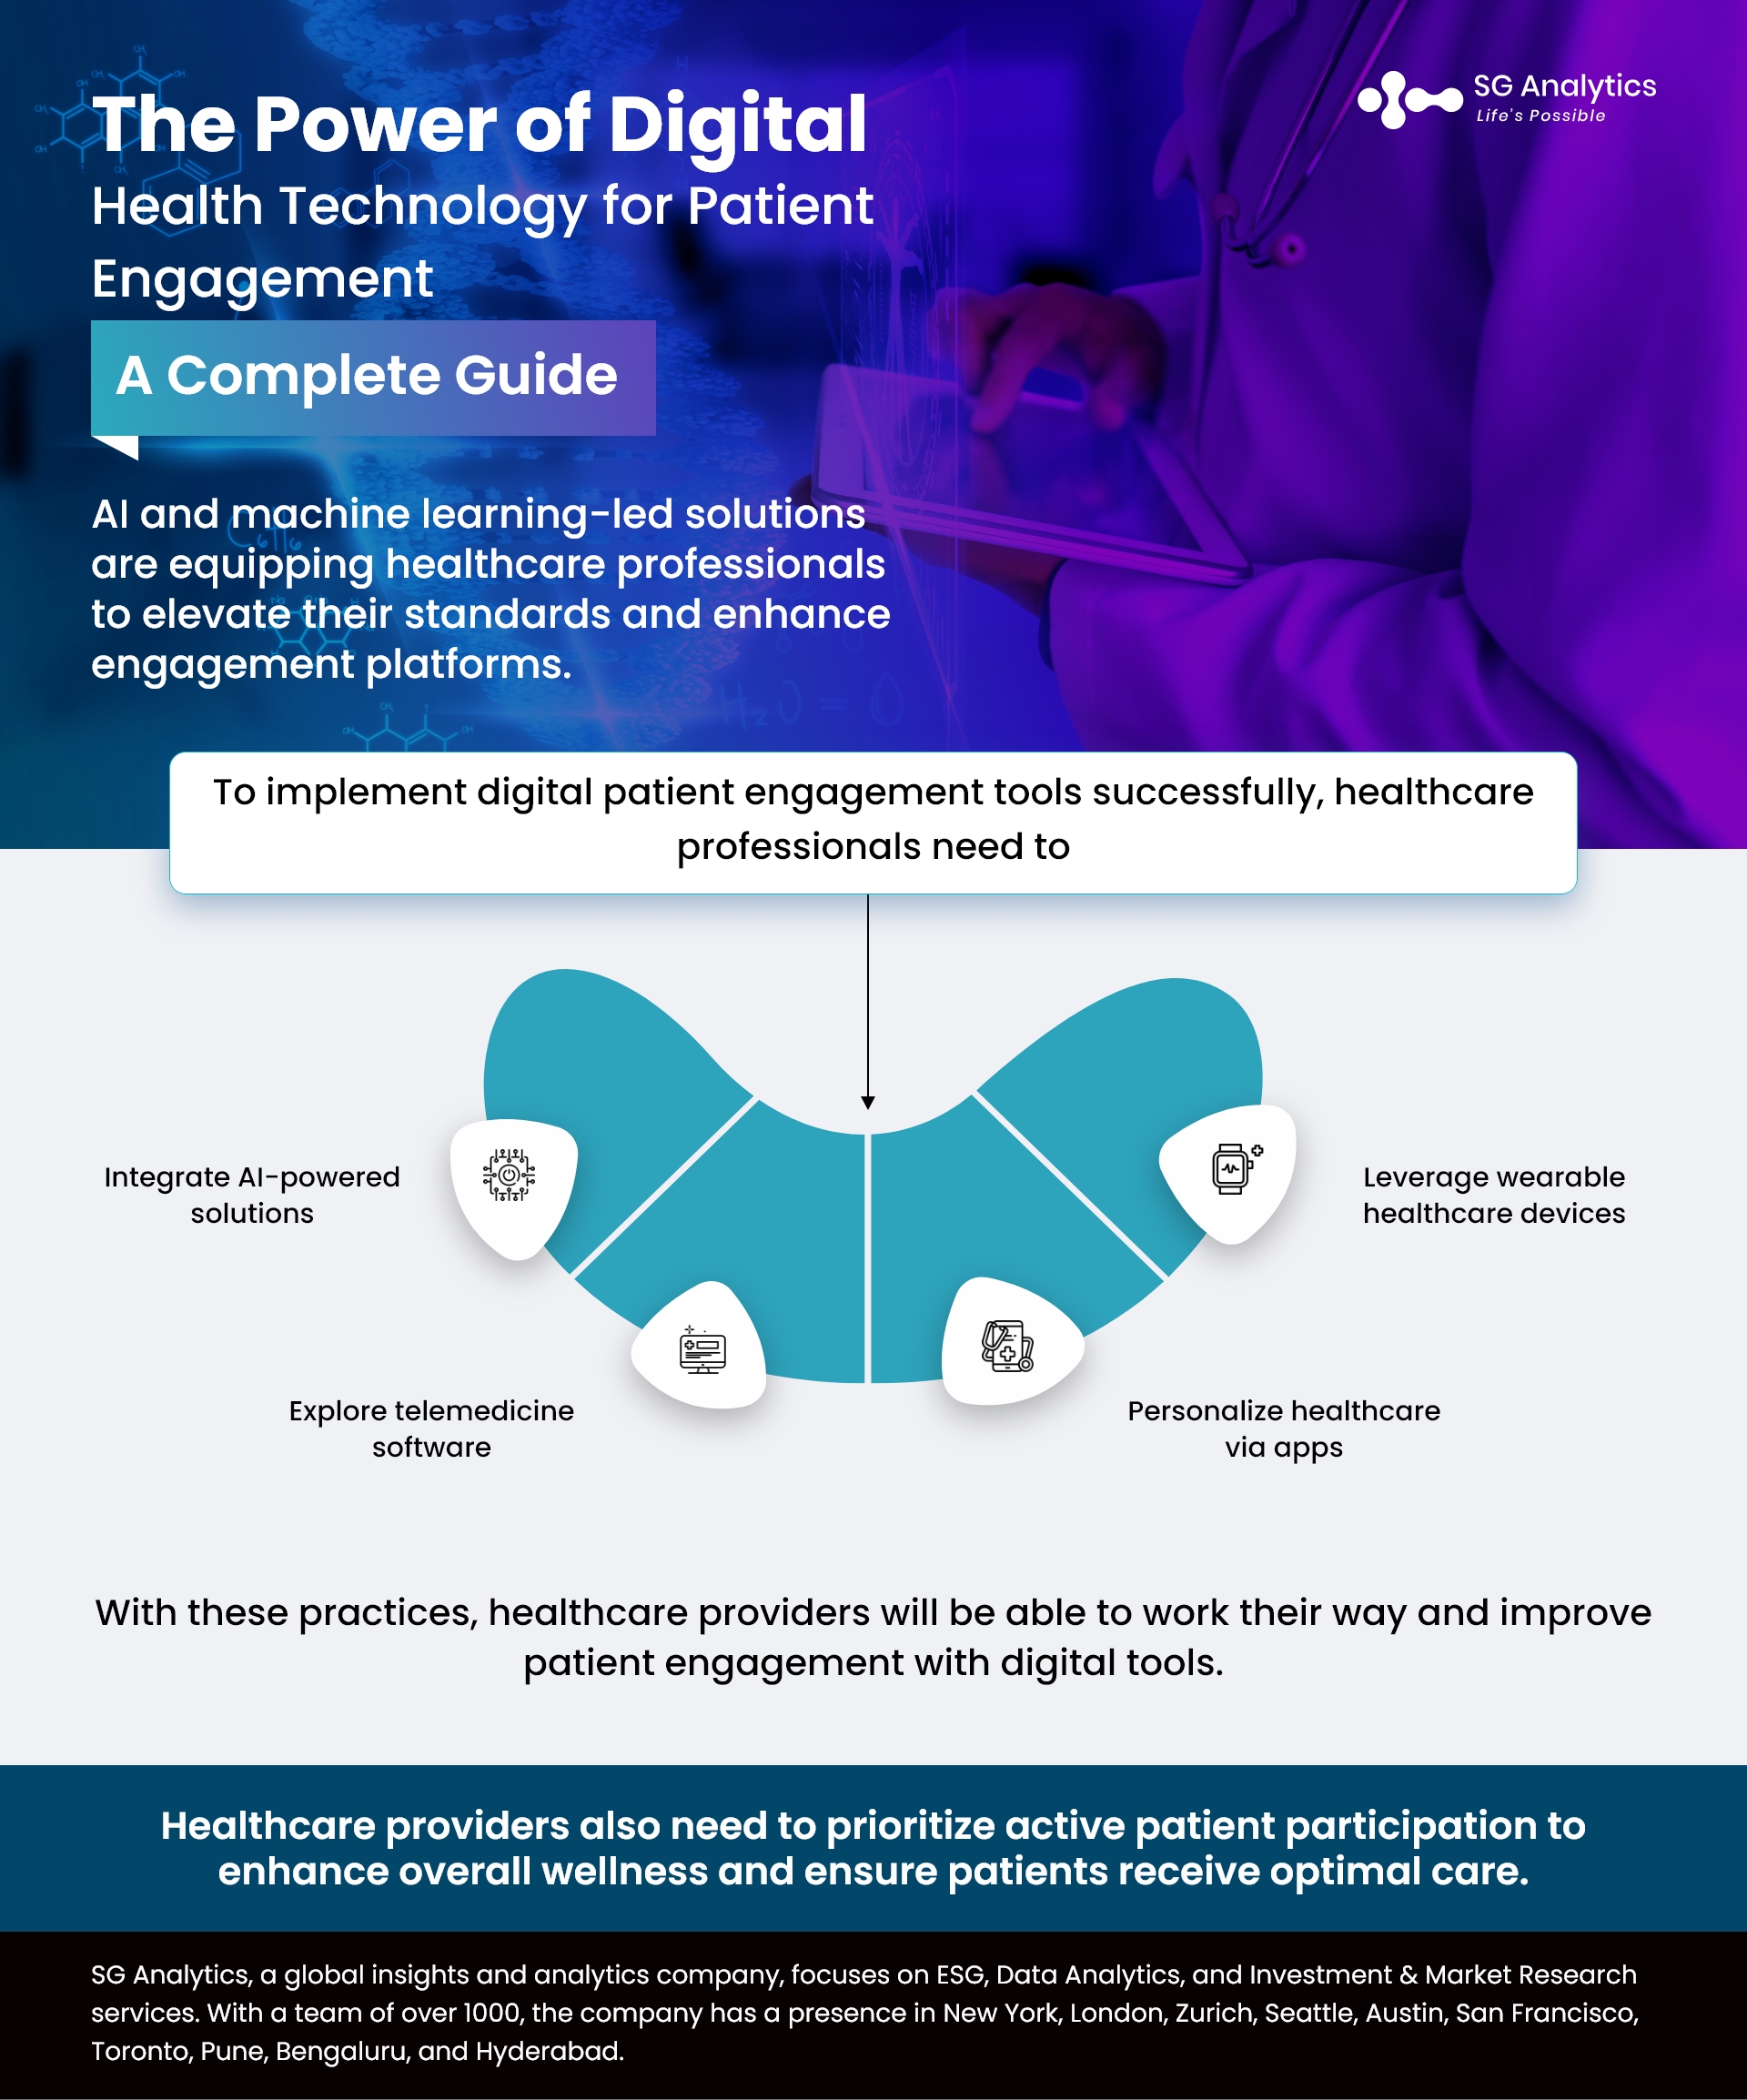 The Power of Digital Health Technology for Patient Engagement